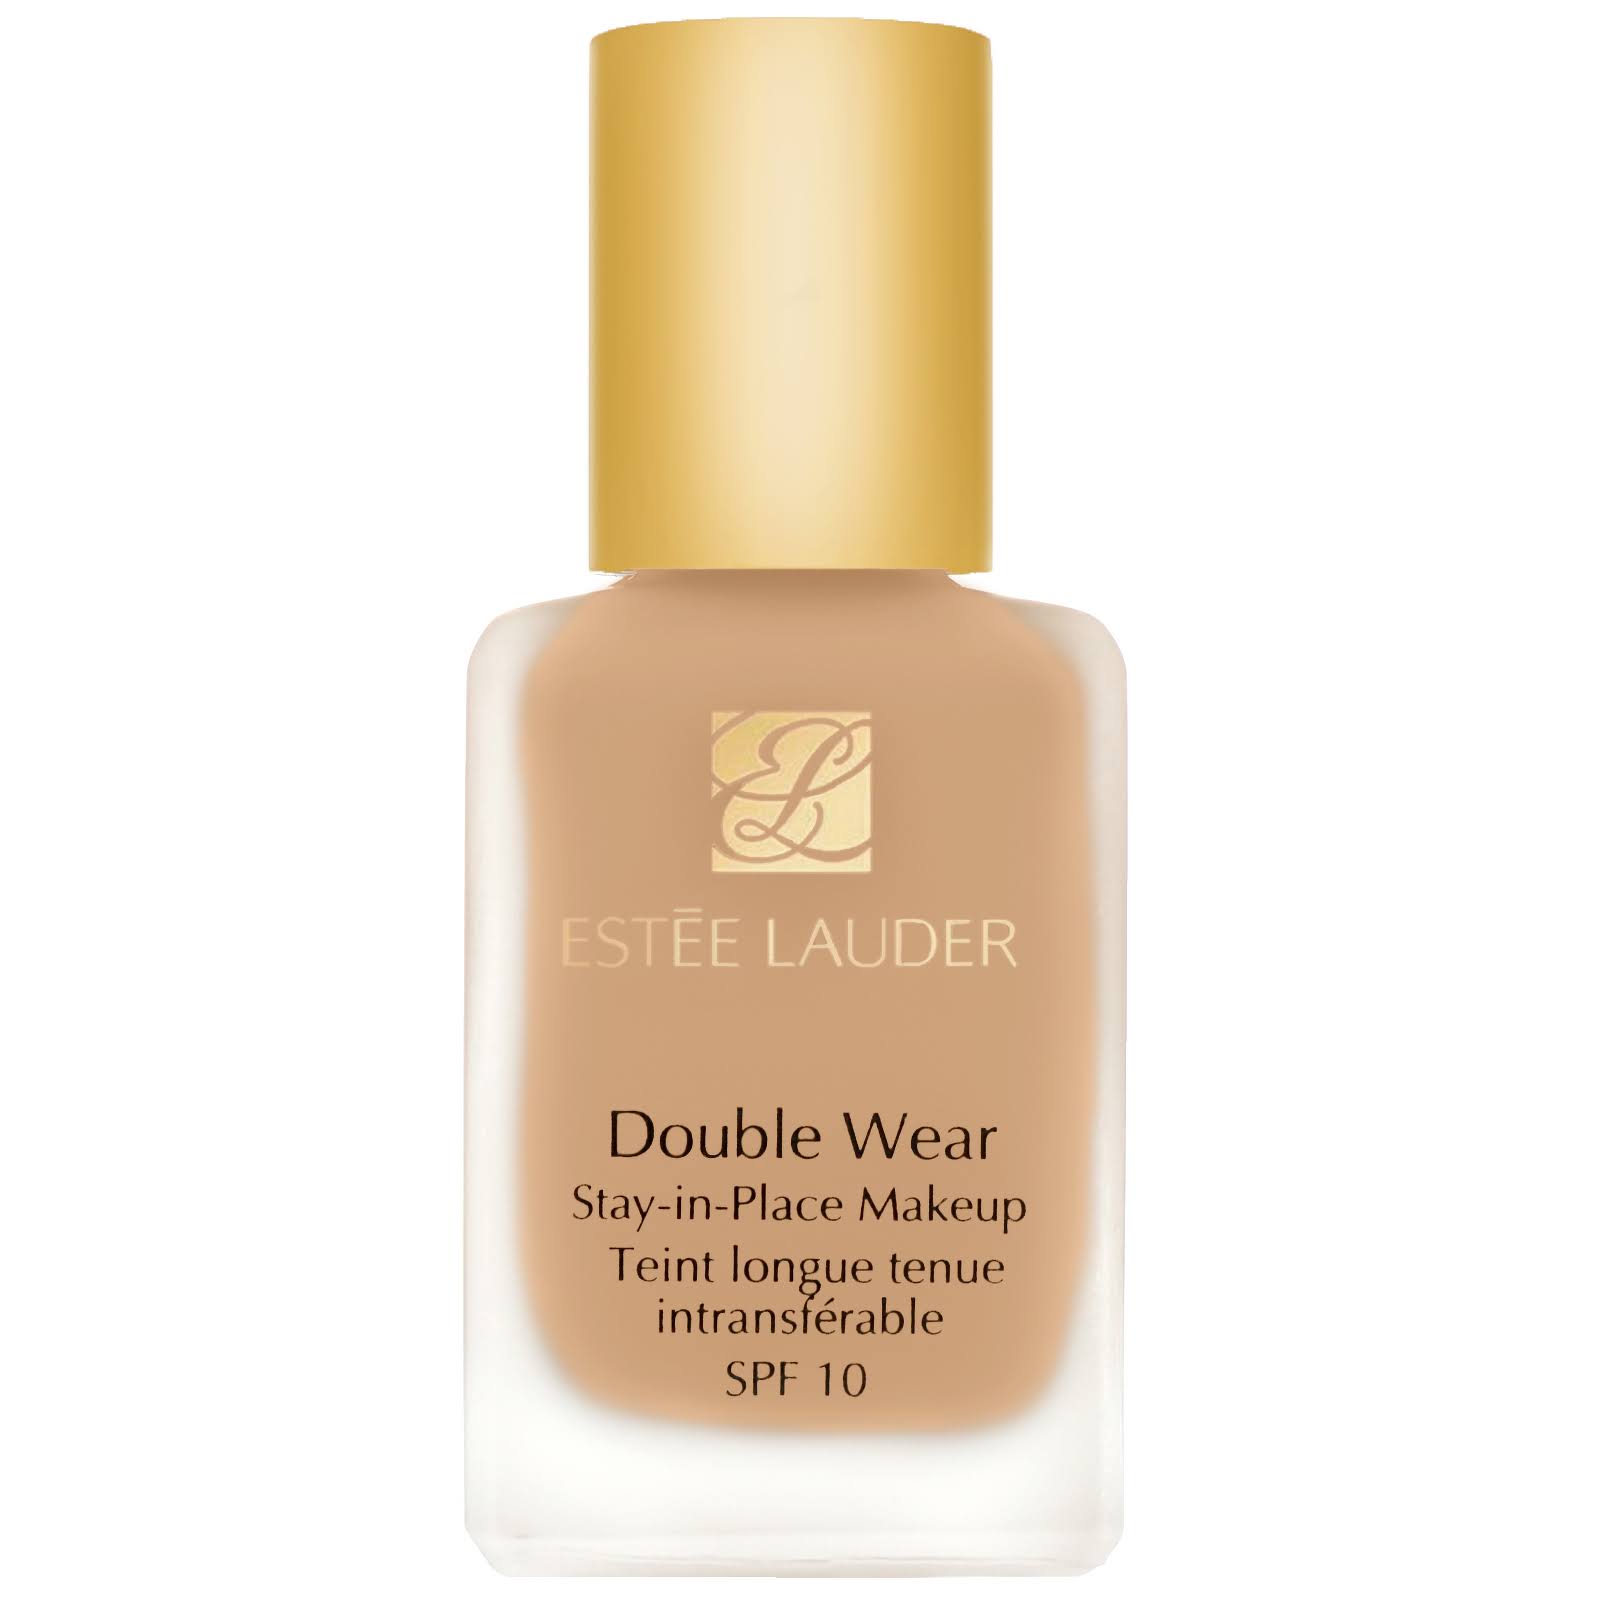 Estee Lauder Double Wear Stay-In-Place Makeup - SPF 10, #36